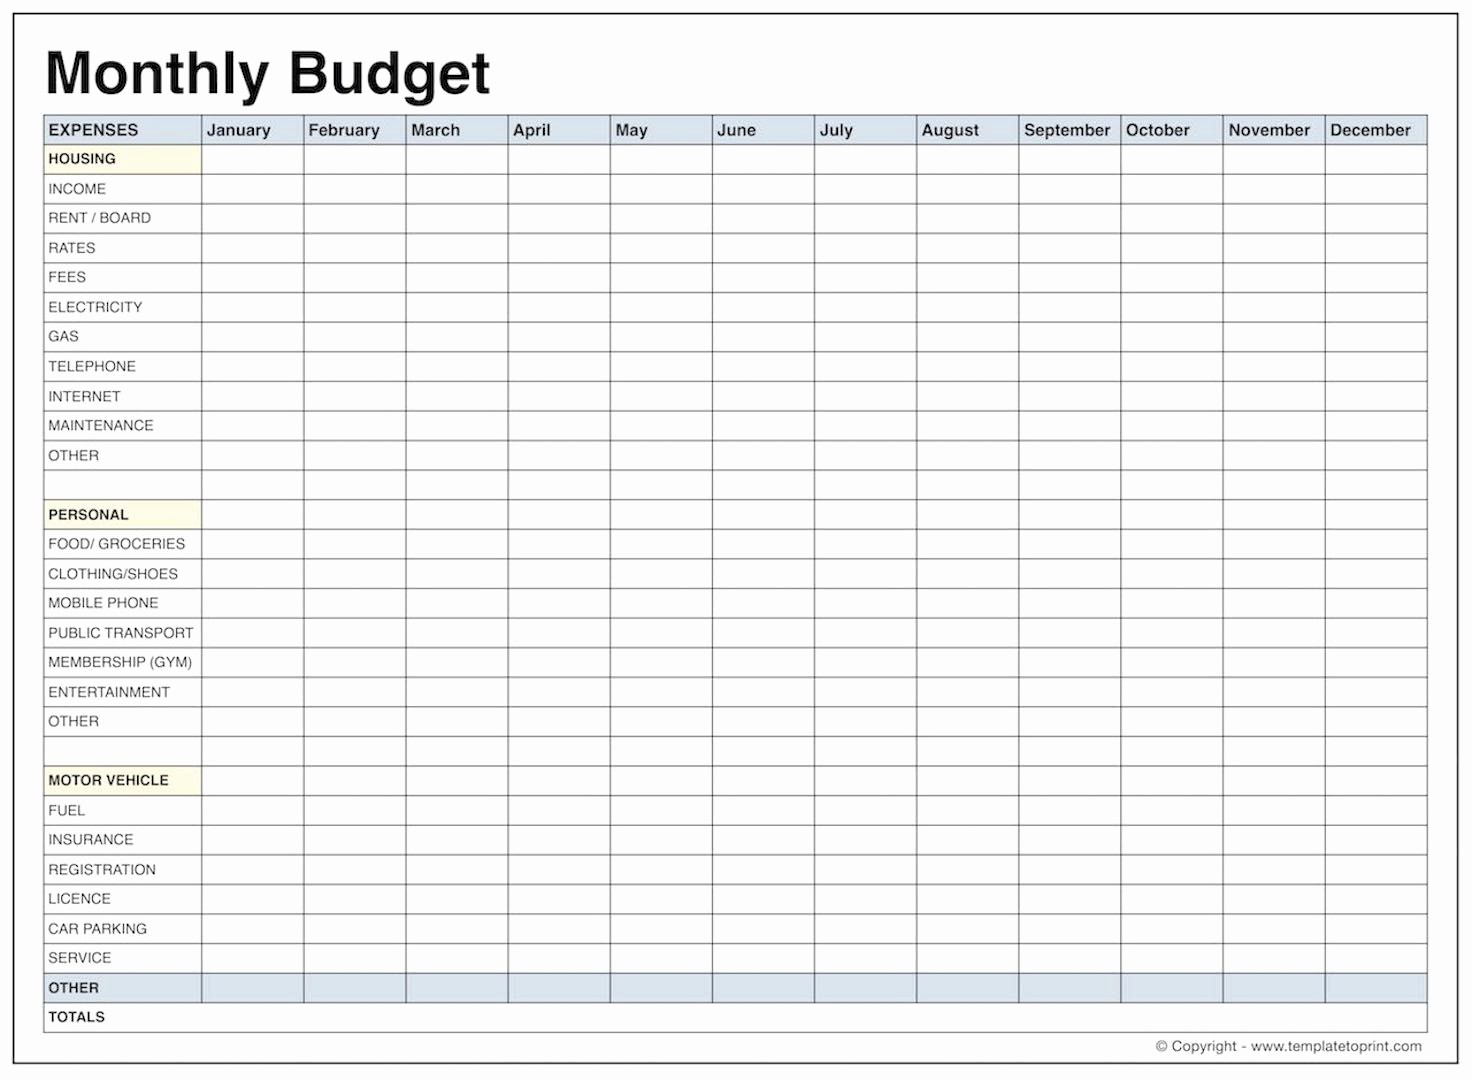 013 Printable Monthly Budget Template Free Best Of Blank Bud Pdf 